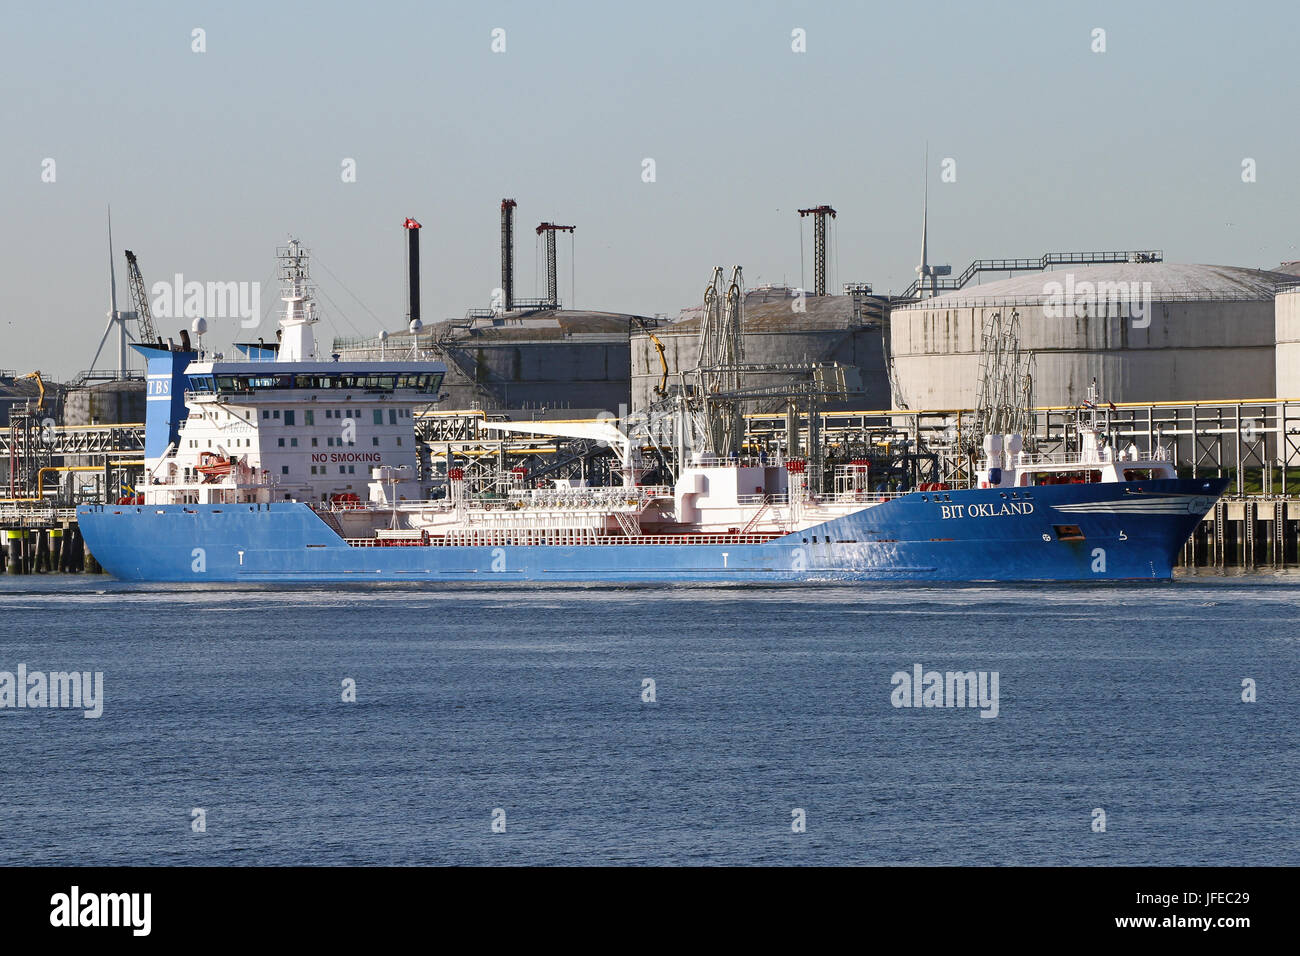 The tanker Bit Okland is unloaded in the port of Rotterdam. Stock Photo